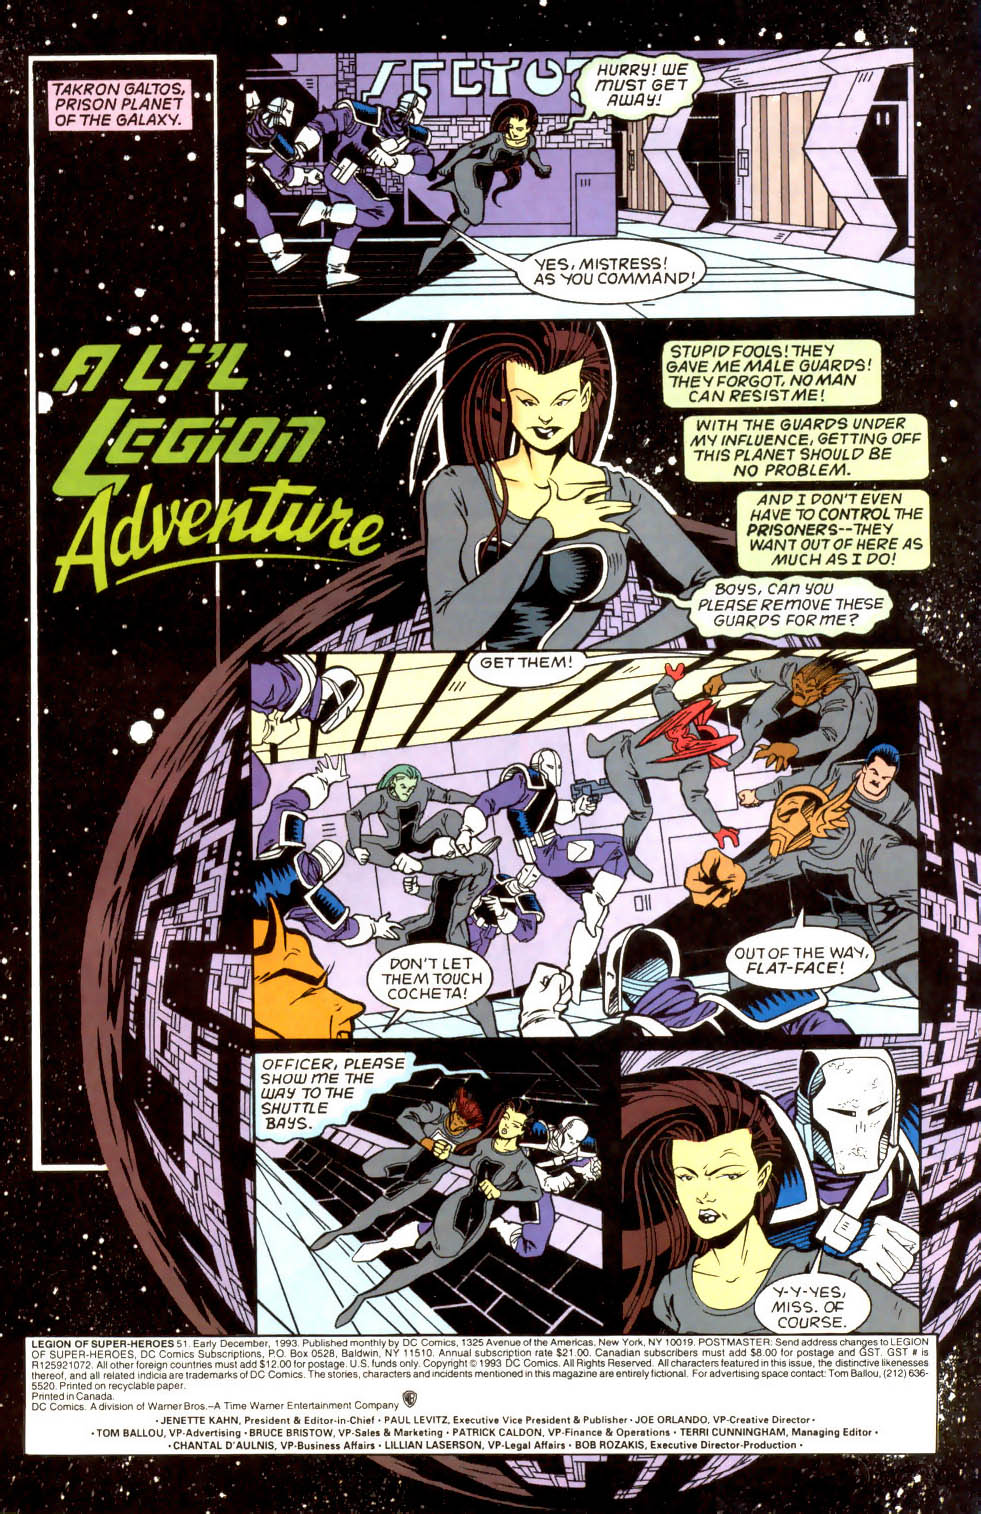 Legion of Super-Heroes (1989) 51 Page 1